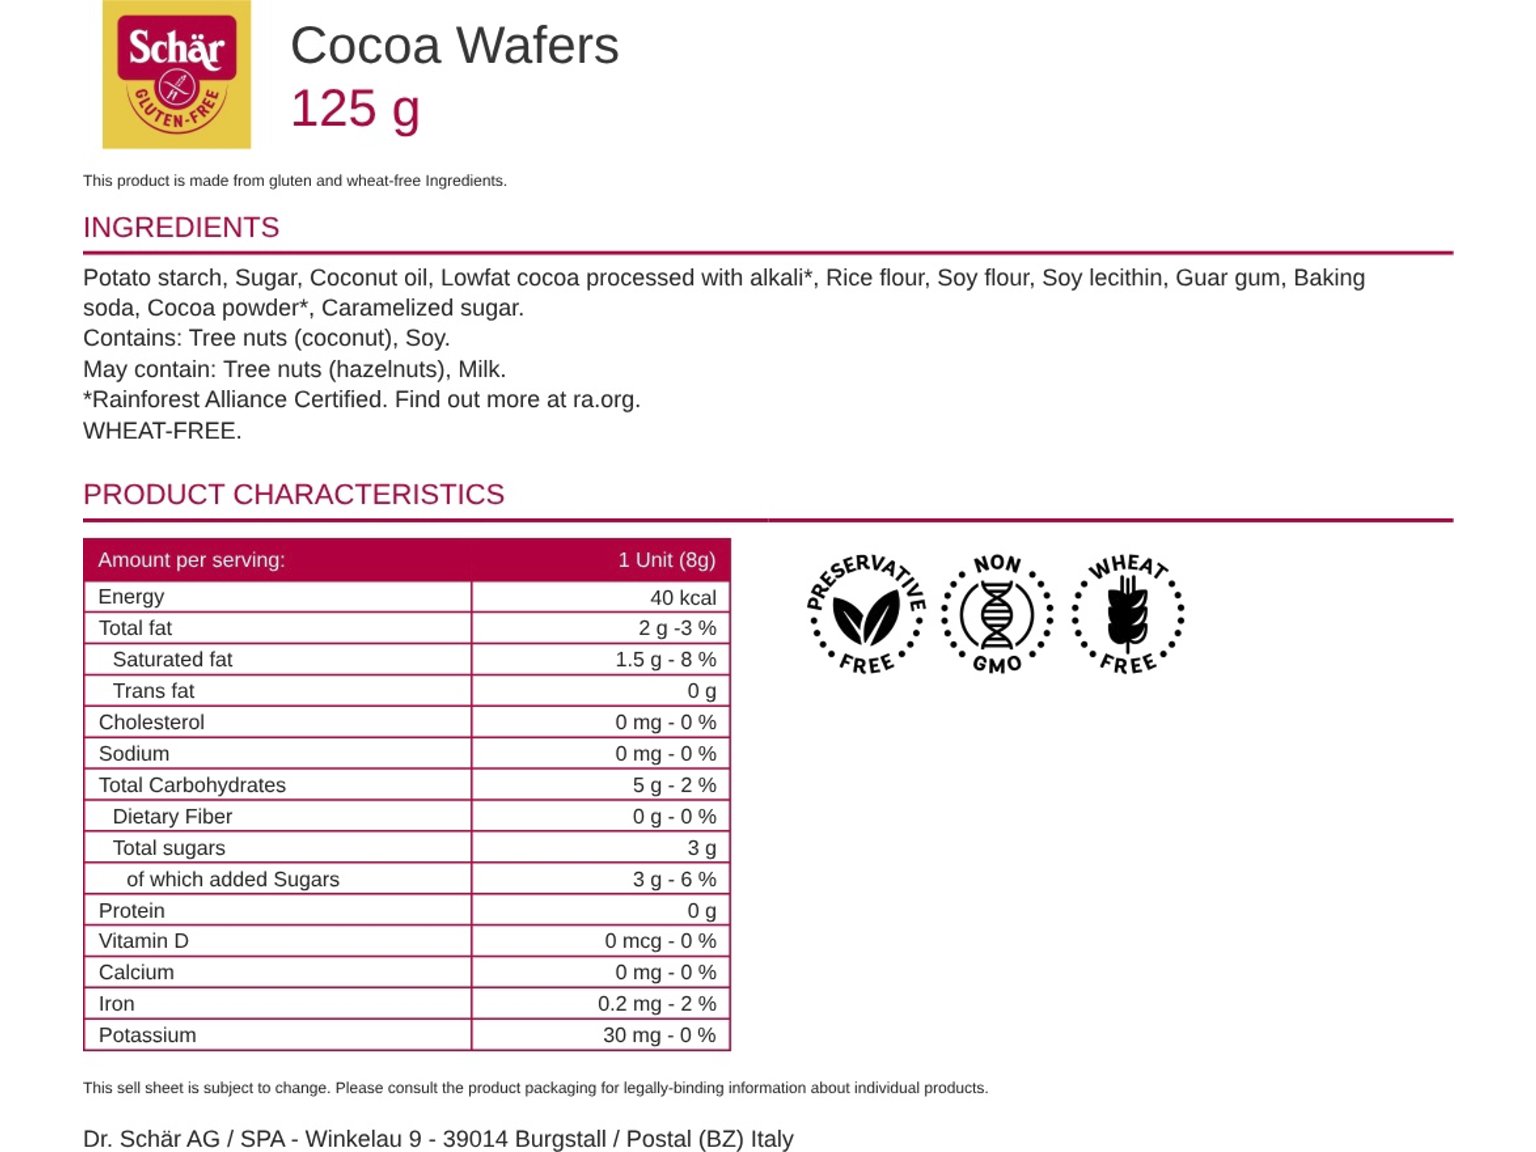 Cocoa Wafers